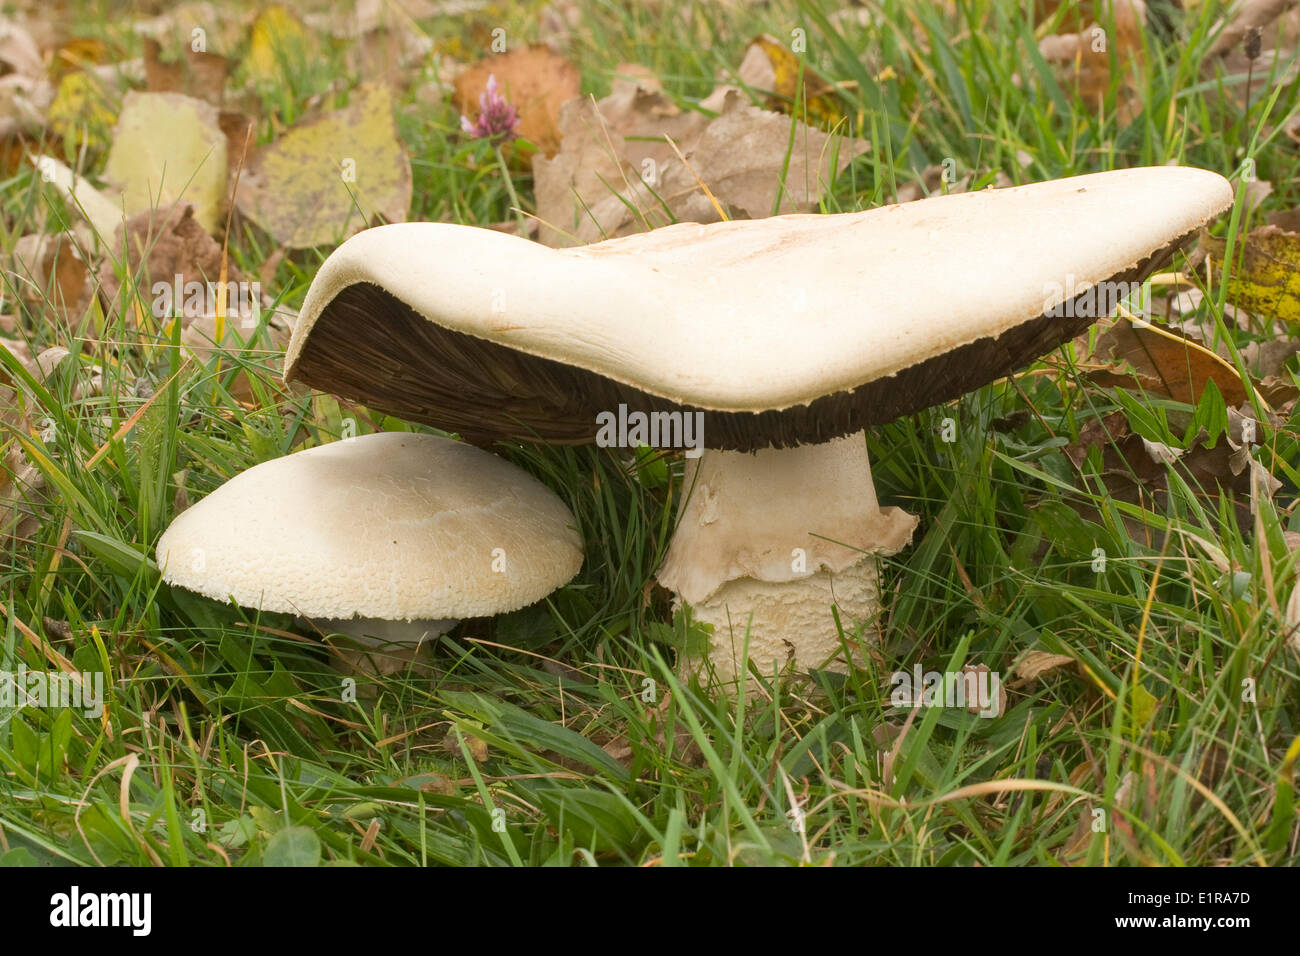 A full grown (10 inch) and a smaller fruiting body of this close relative of the Horse Mushroom between grasses and fallen leaves. Stock Photo